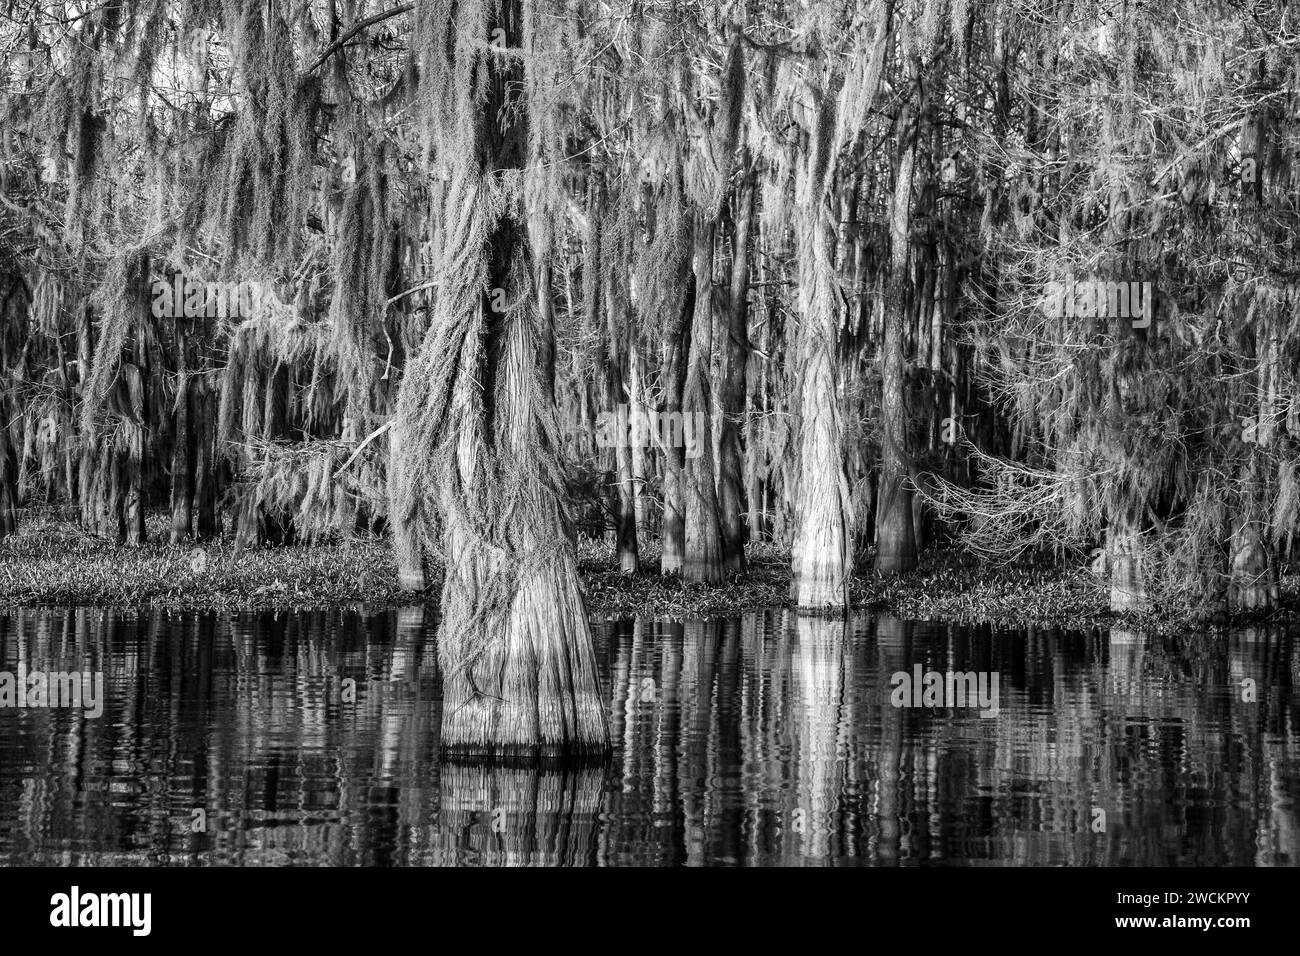 Sunrise light on bald cypress trees draped with Spanish moss in a lake in the Atchafalaya Basin in Louisiana.  Invasive water hyacinth covers the wate Stock Photo